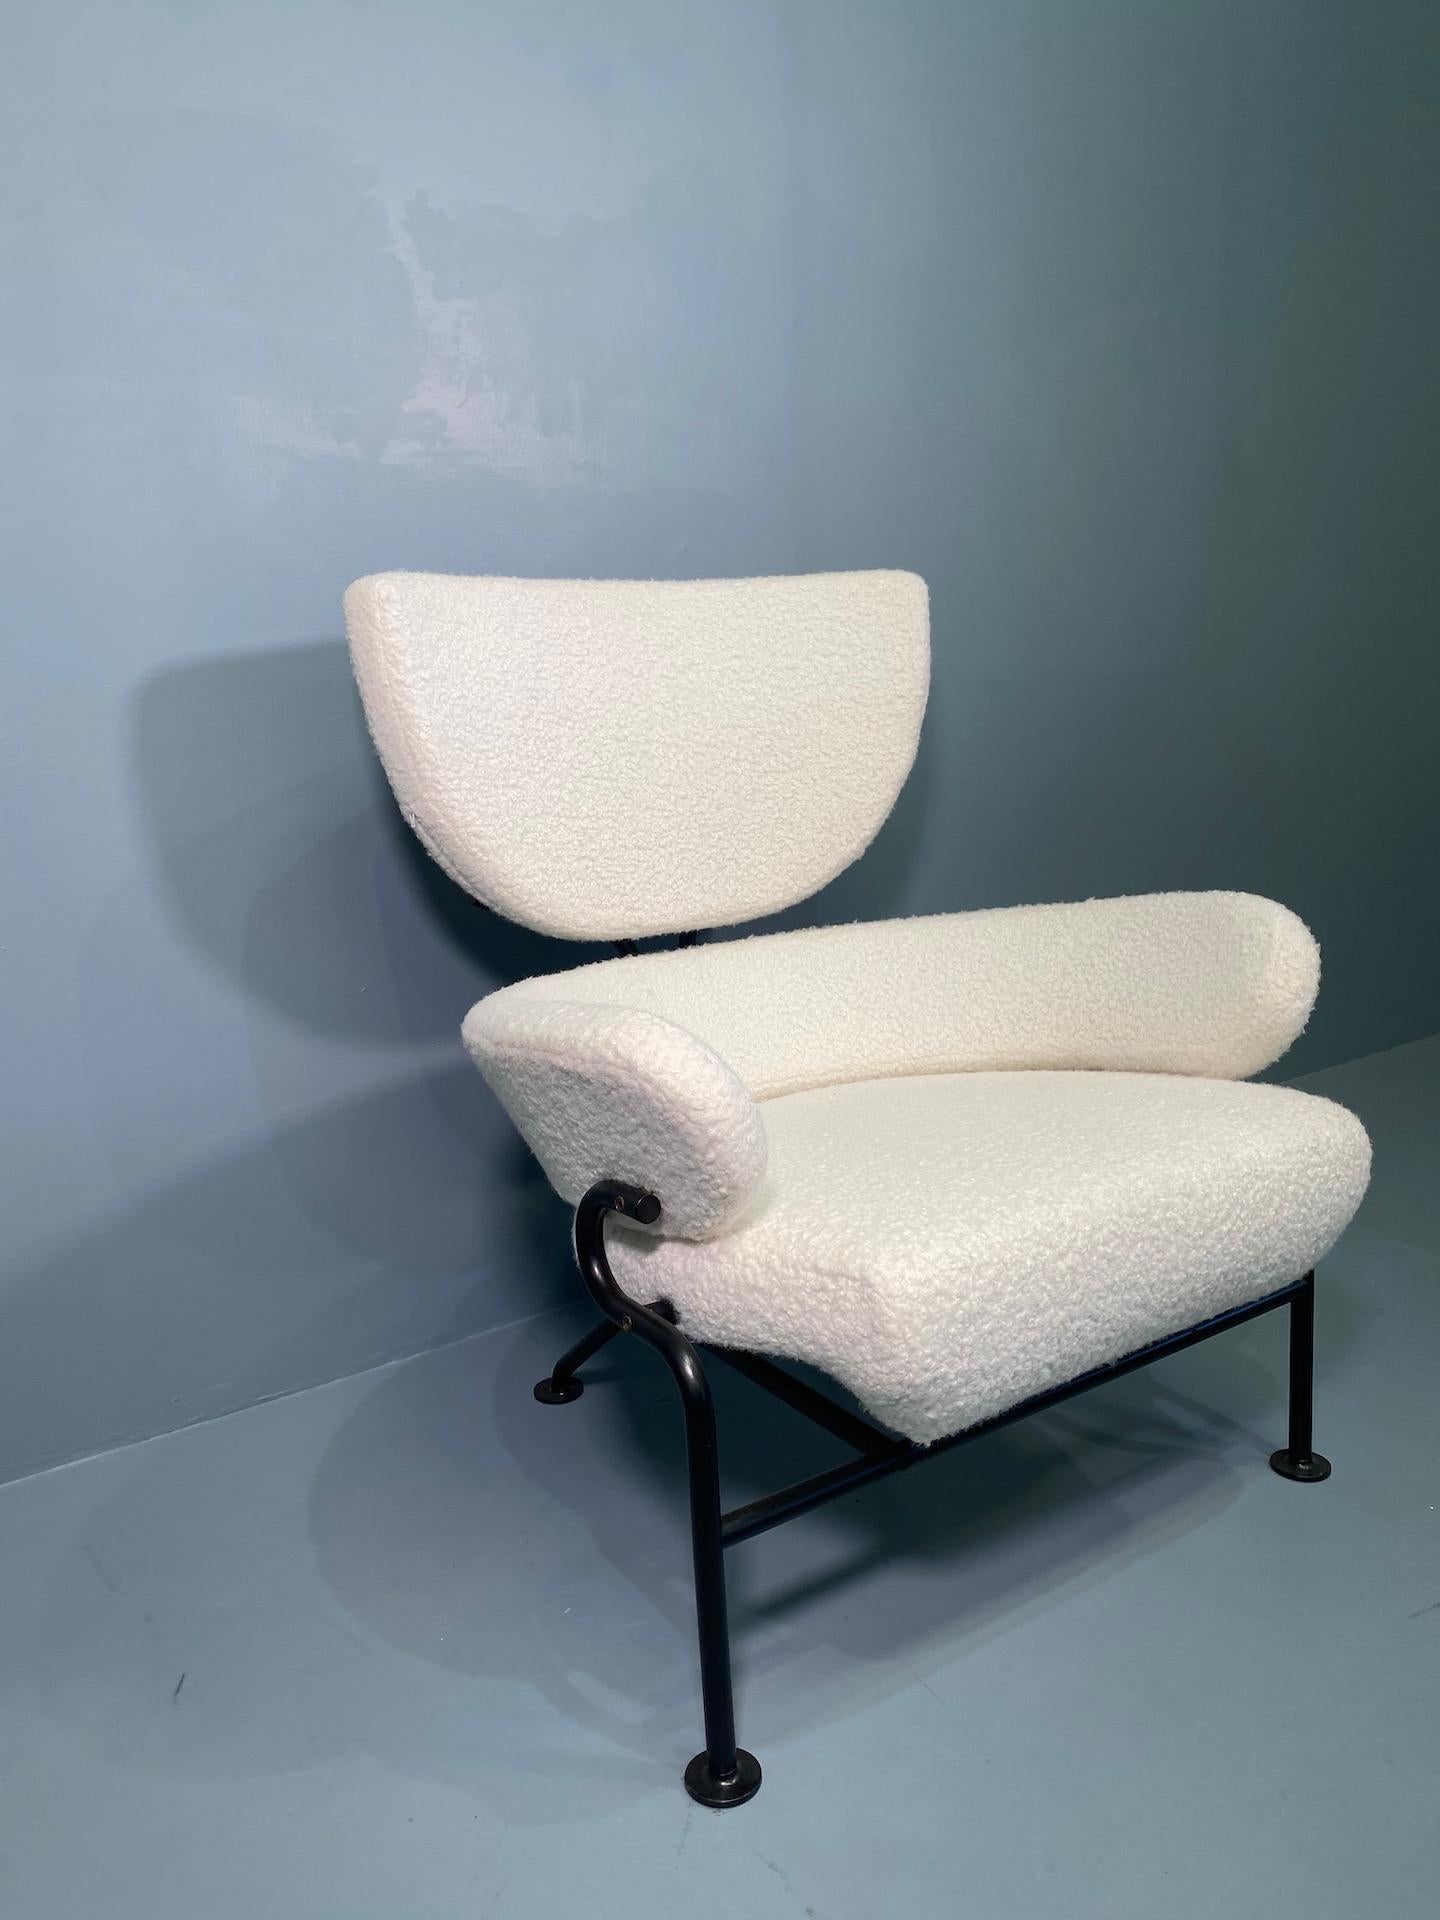 Pair of lounge chairs by famous Italian modernist Franco Albini and Franca Helg 